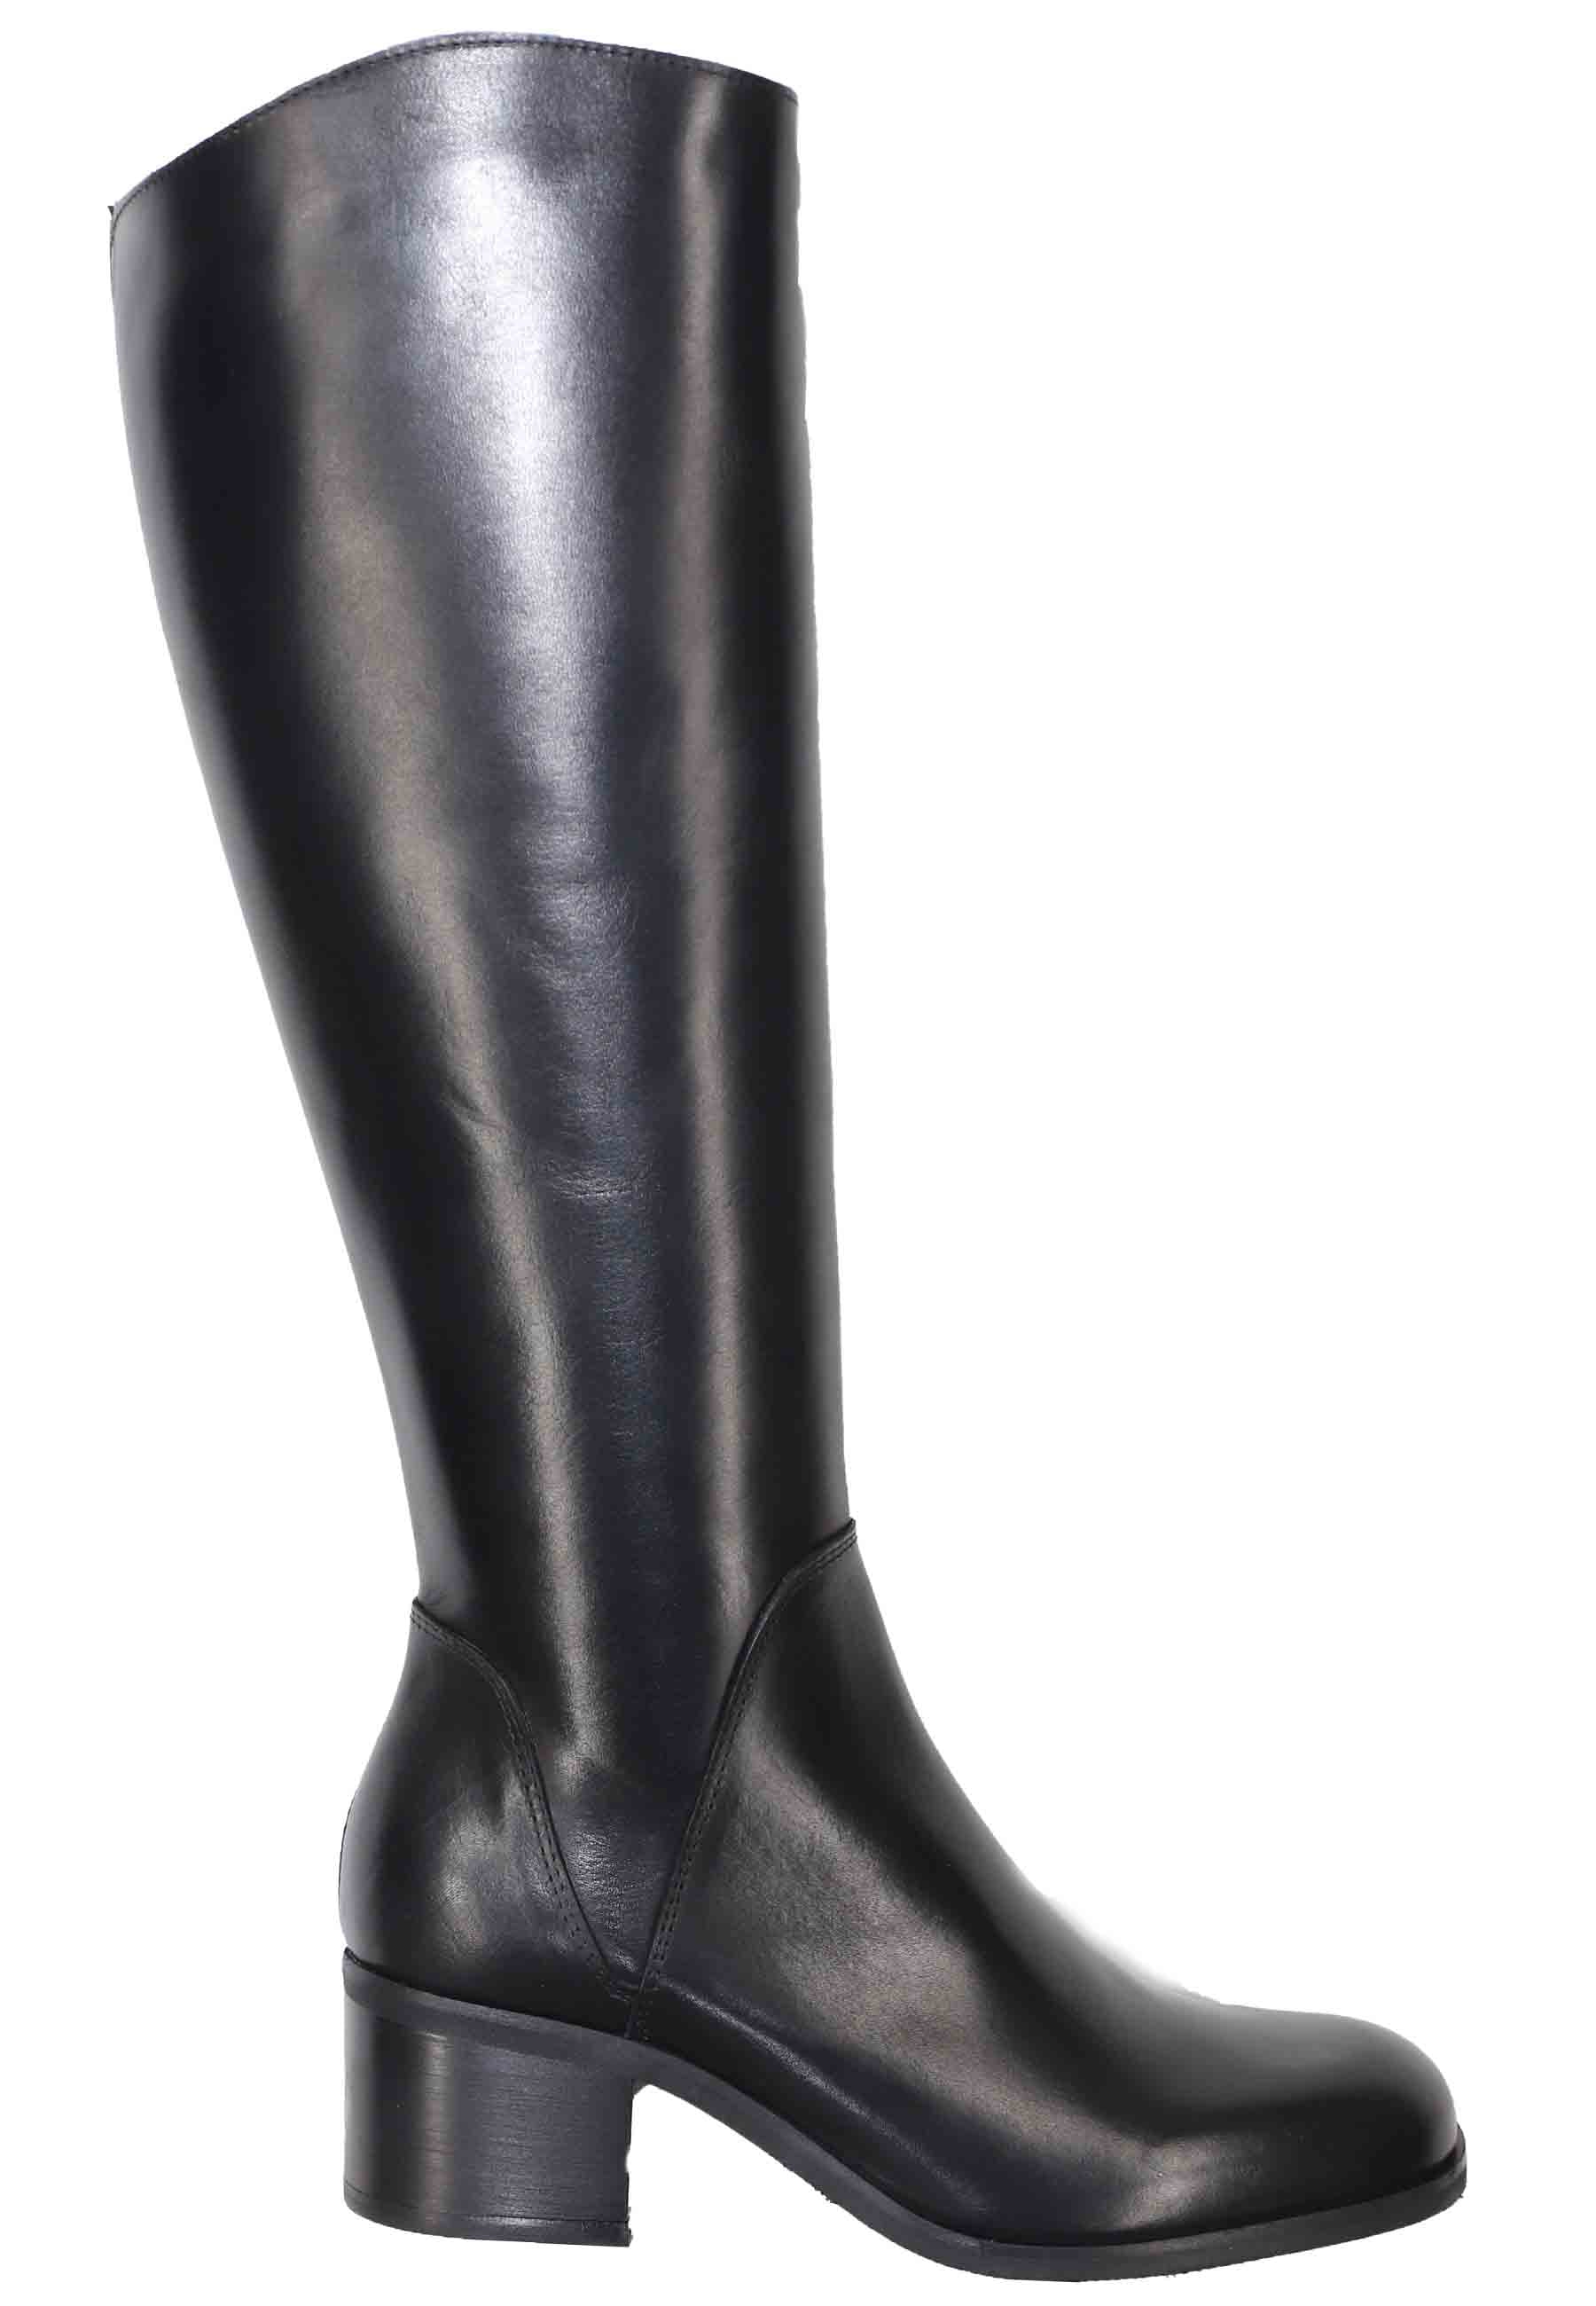 Women's black leather boots with leather heels